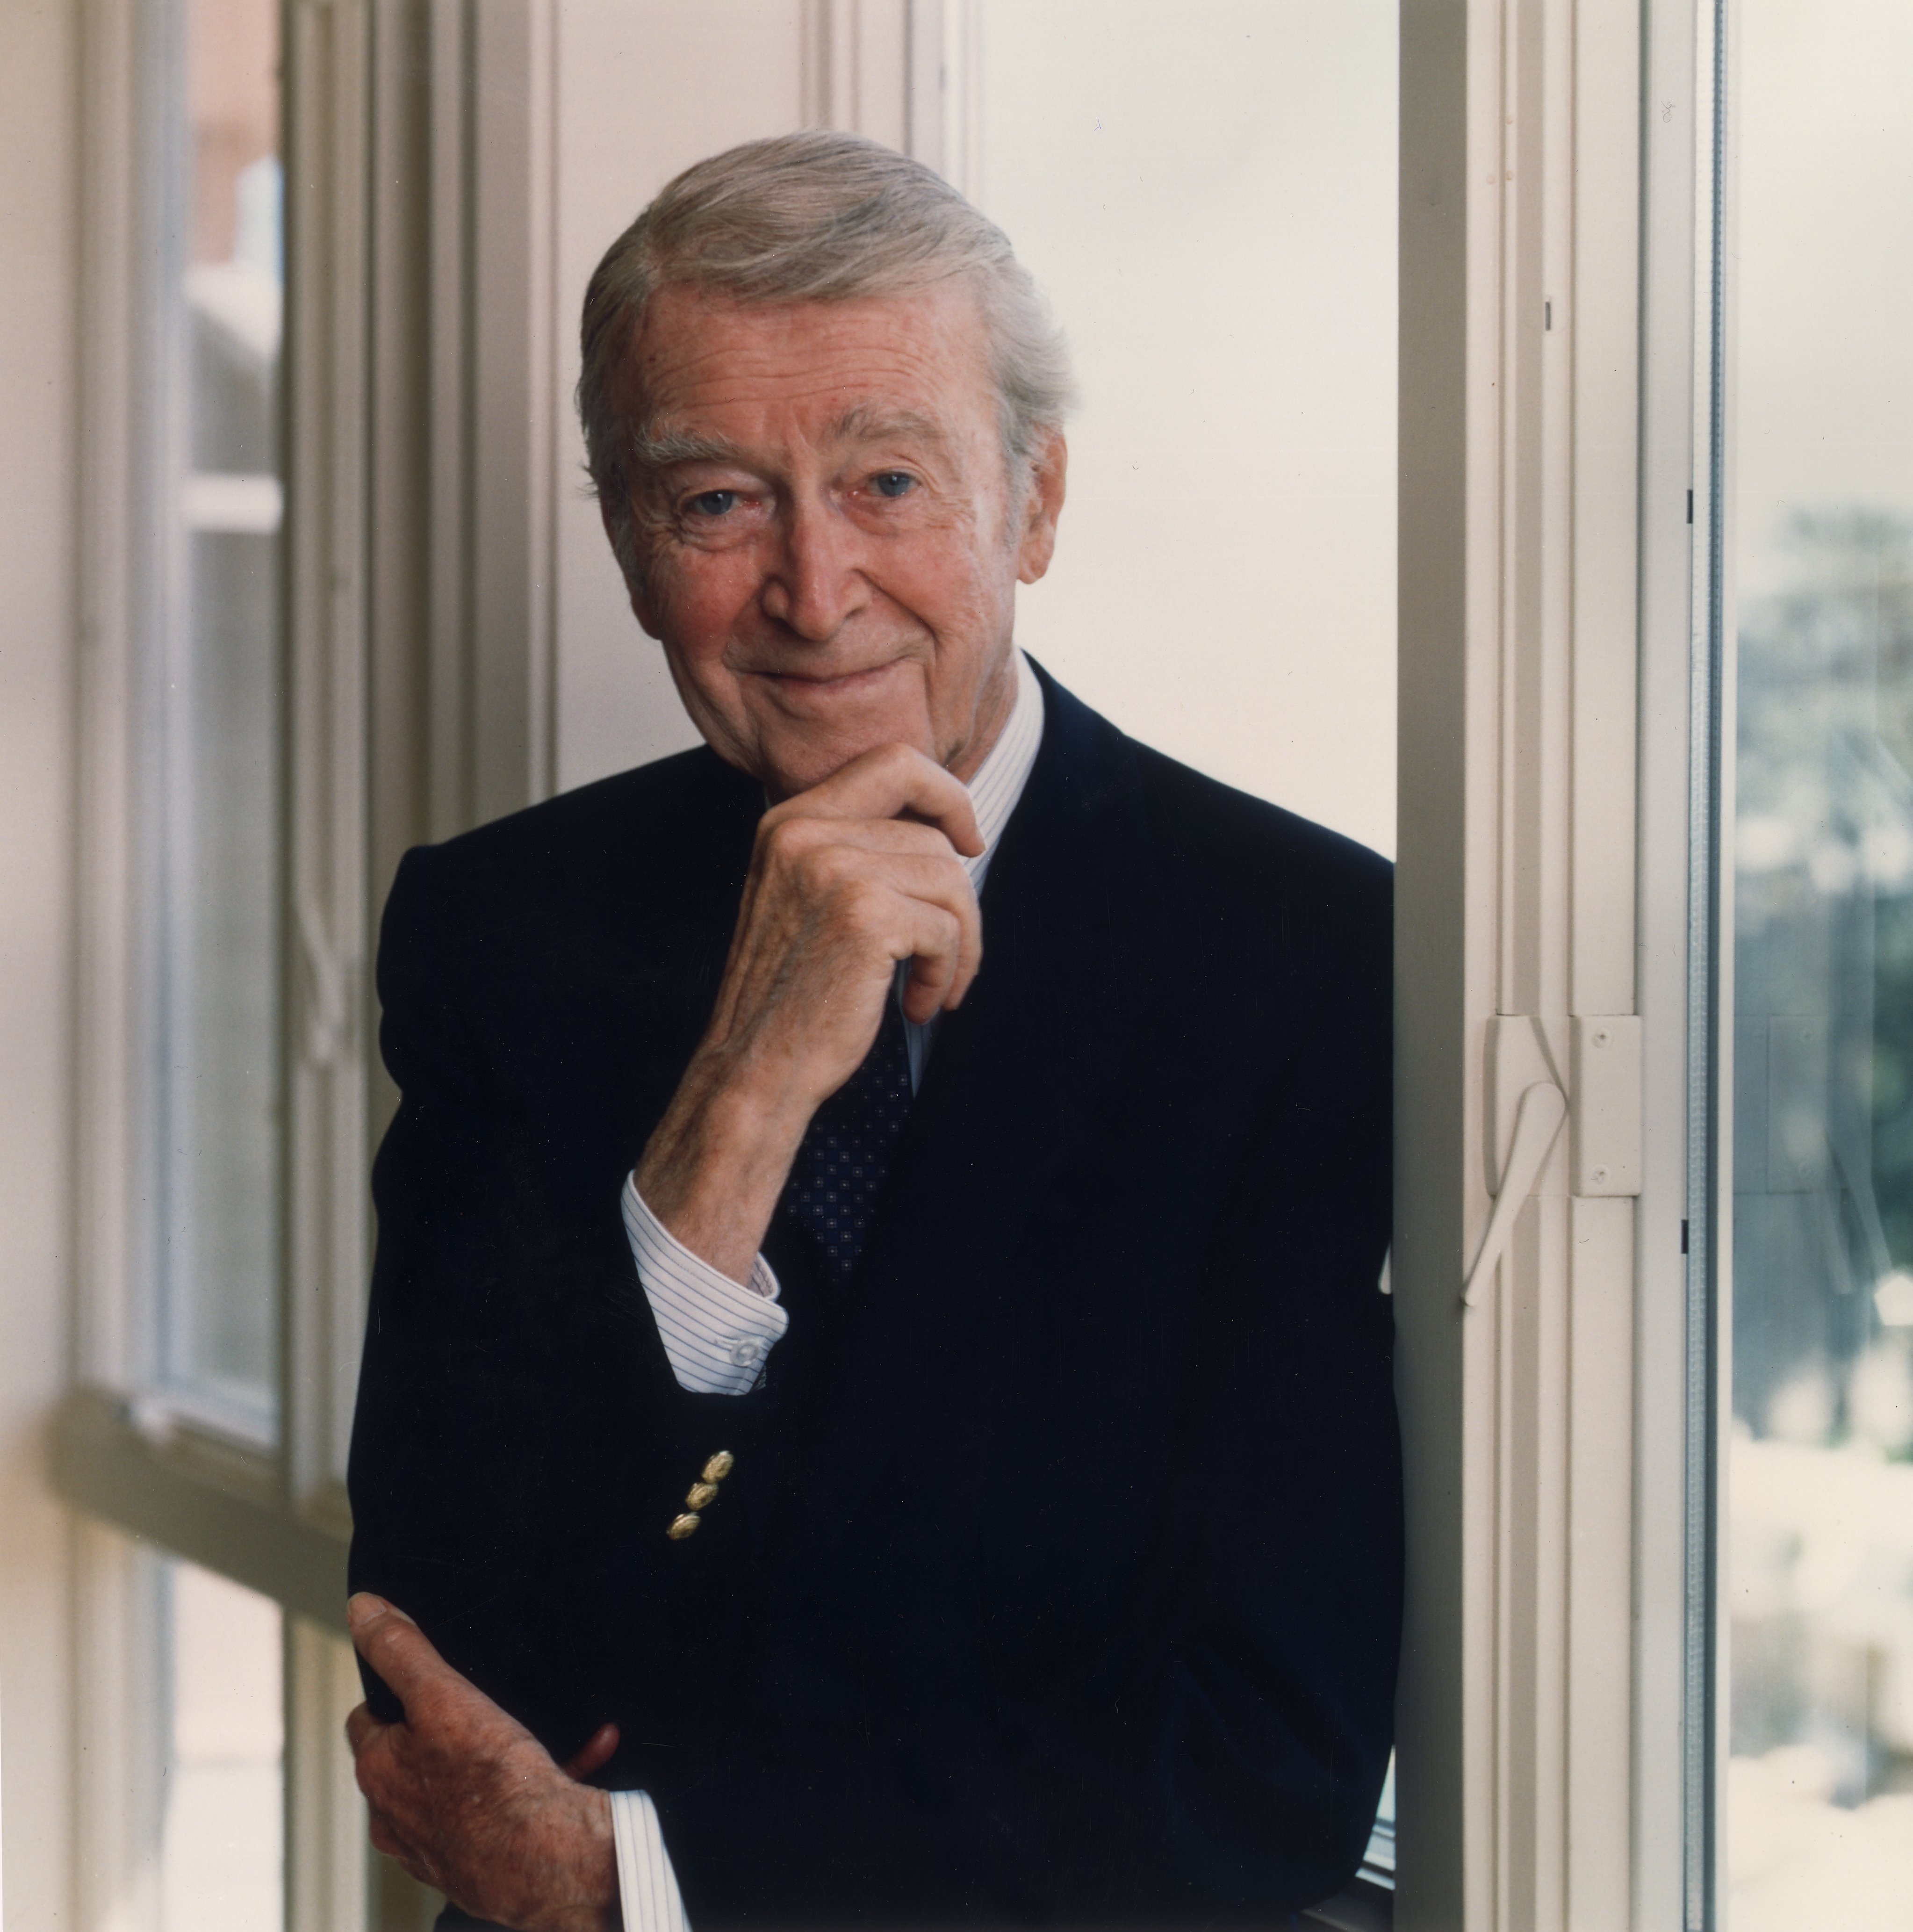 James Stewart posing for a photo, circa 1988. | Source: Nancy R. Schiff/Hulton Archive/Getty Images